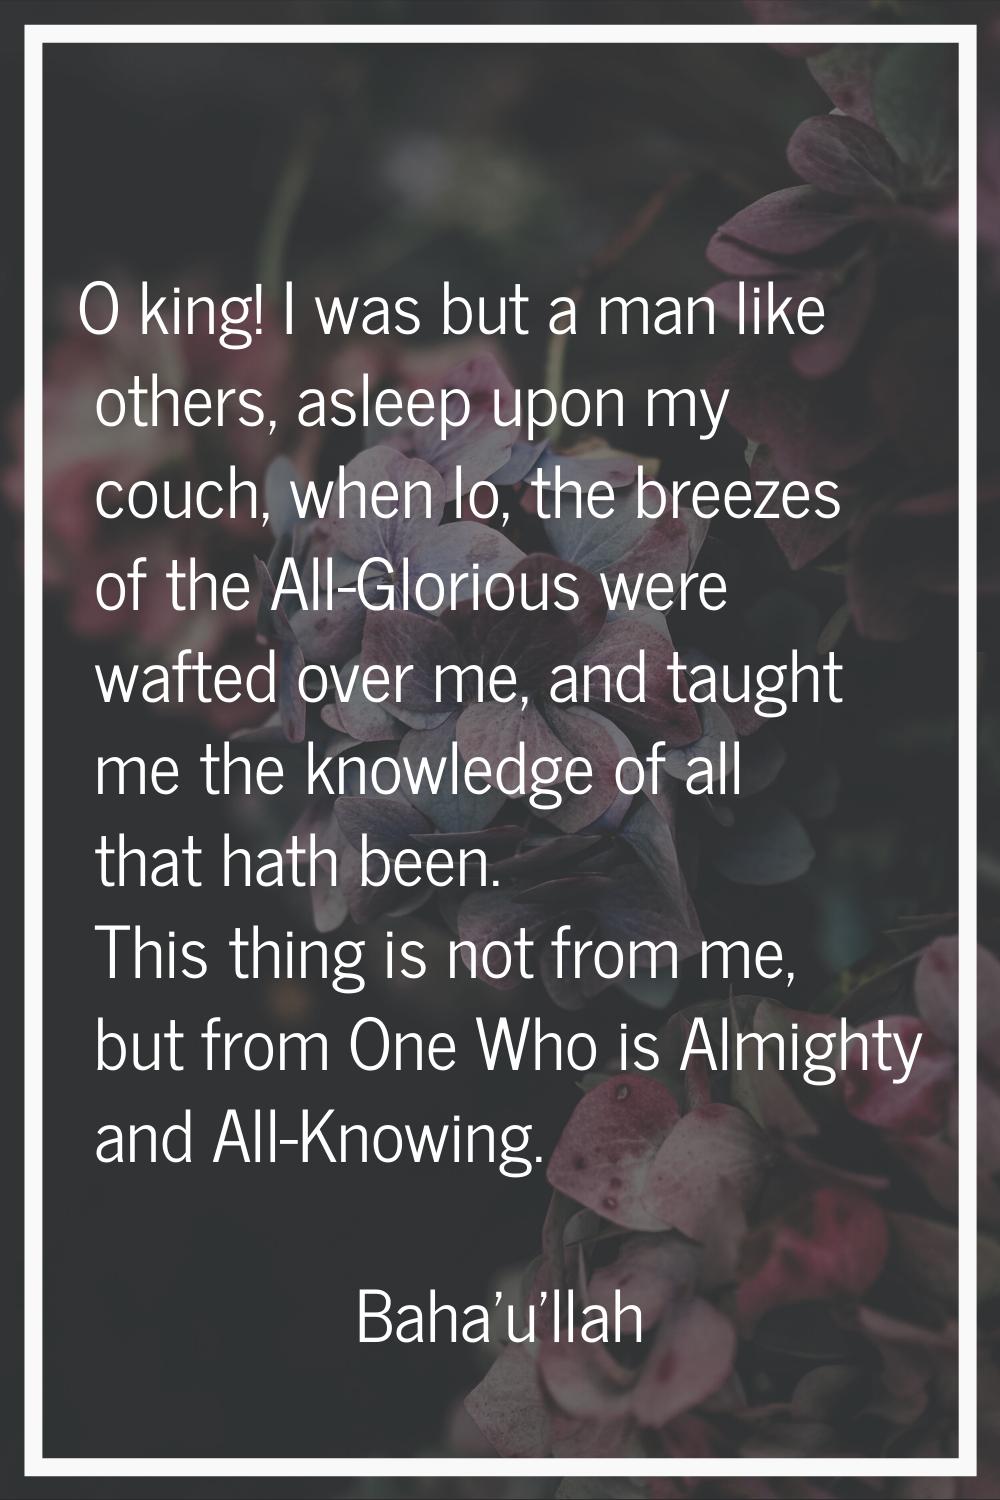 O king! I was but a man like others, asleep upon my couch, when lo, the breezes of the All-Glorious